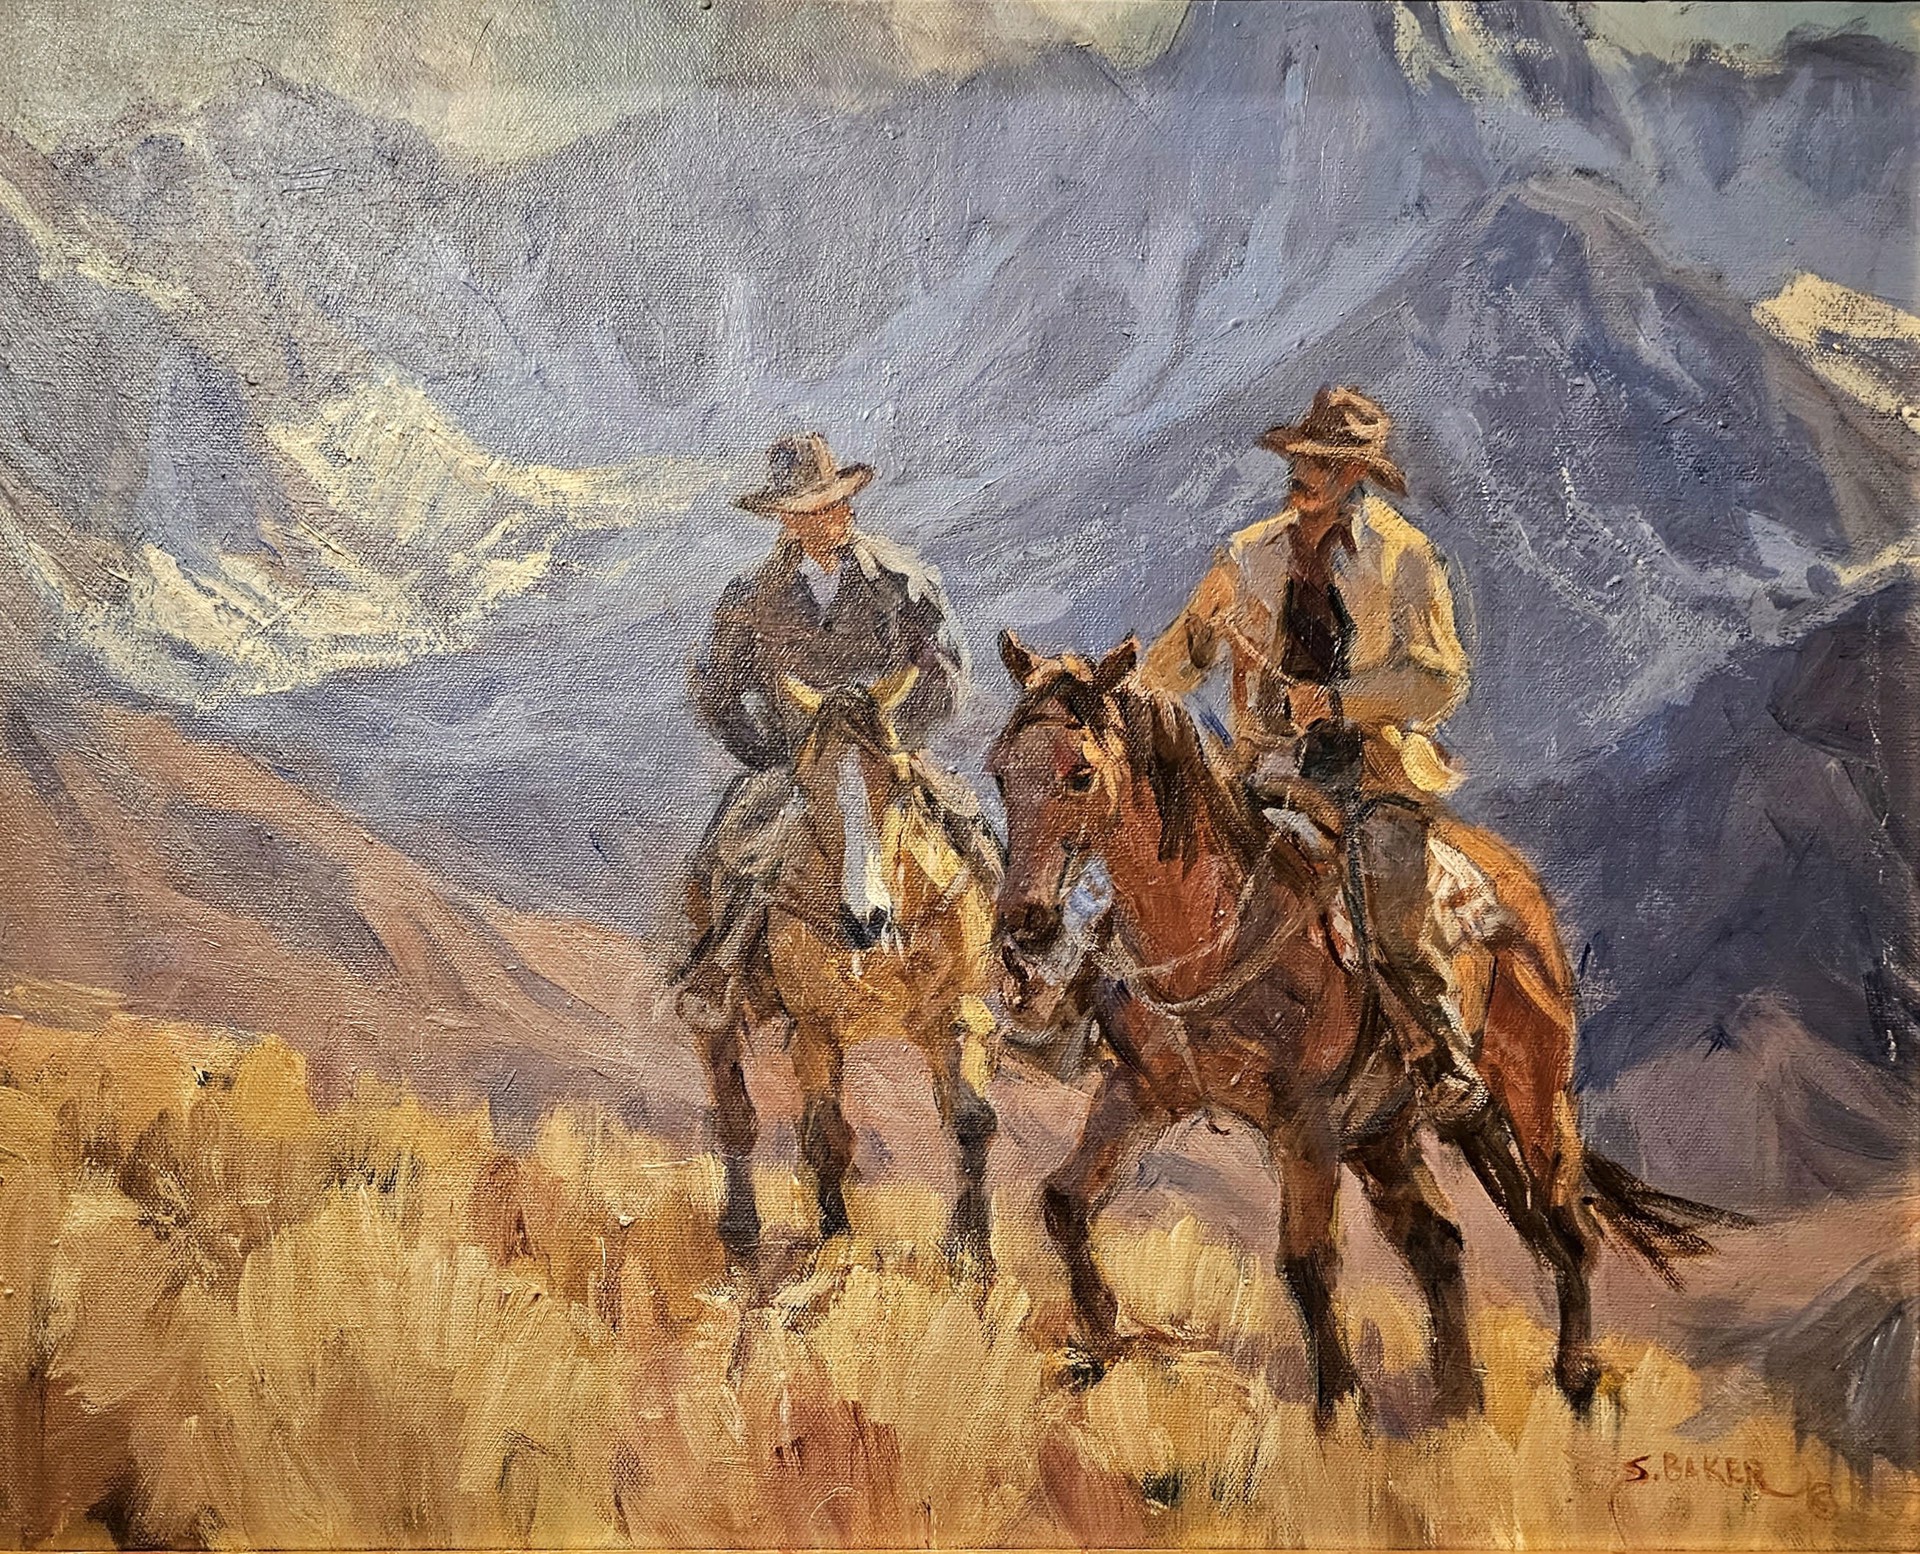 Shadow of Mt. Humphrey by Suzanne Baker